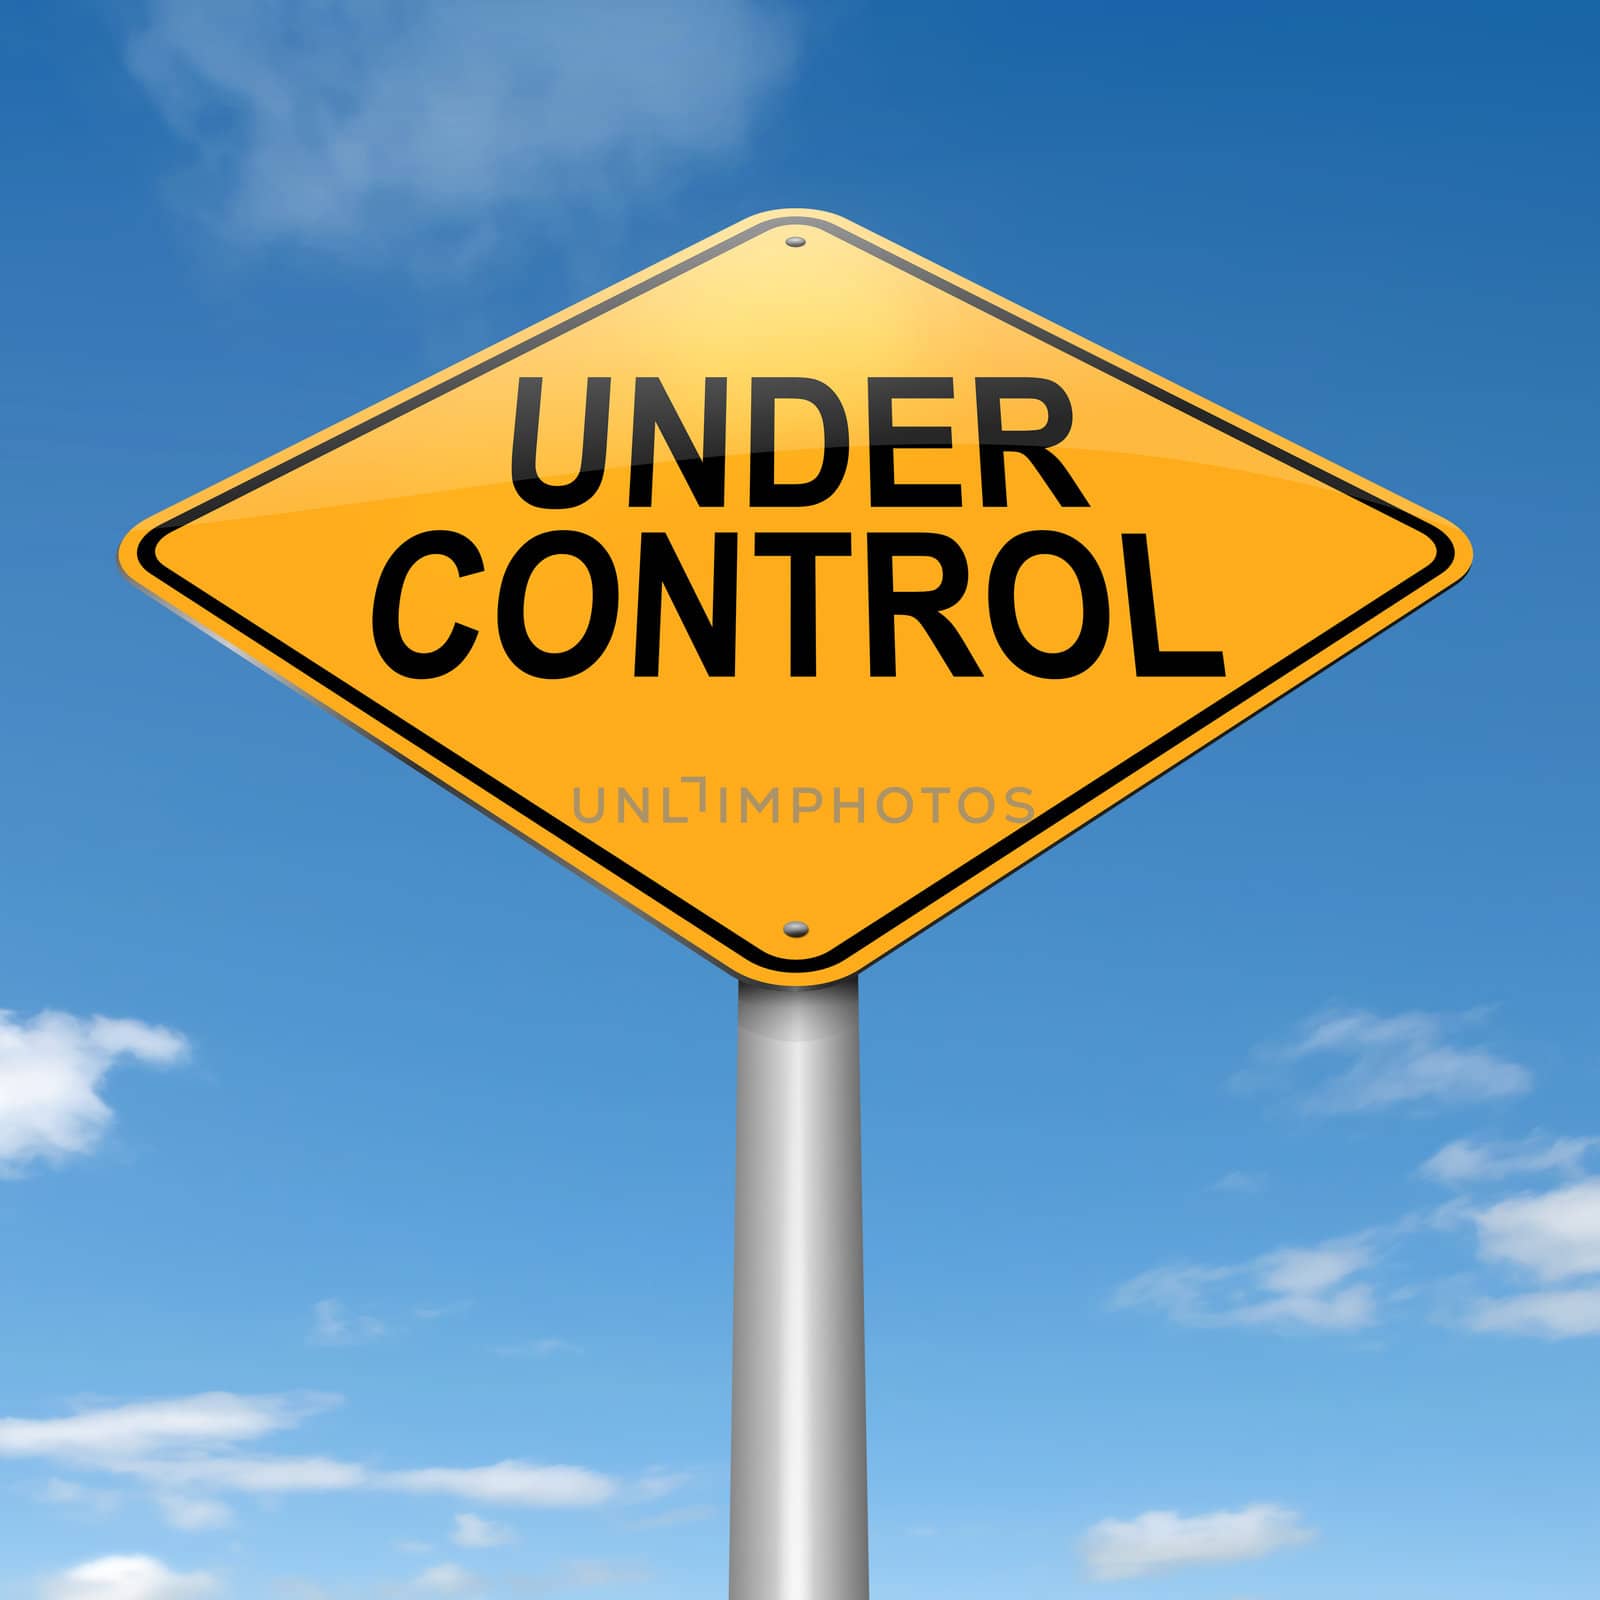 Illustration depicting a roadsign with an under control concept. Sky background.